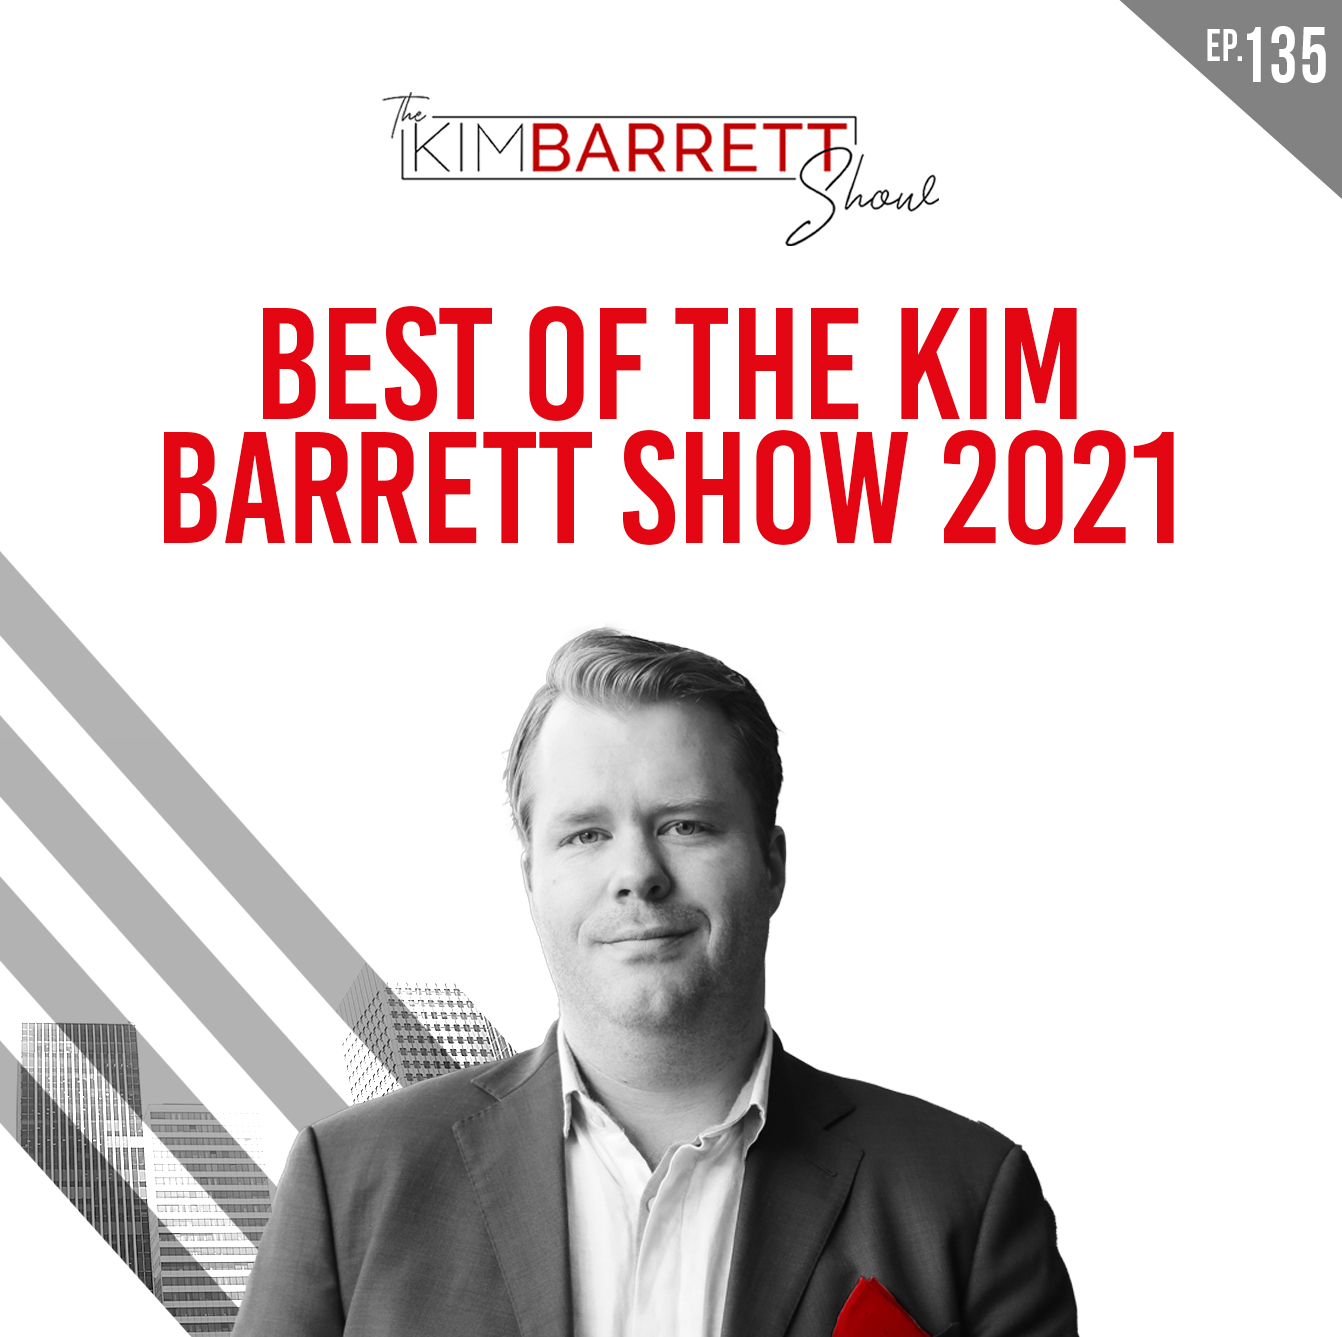 The Best of The Kim Barrett Show Podcast 2021